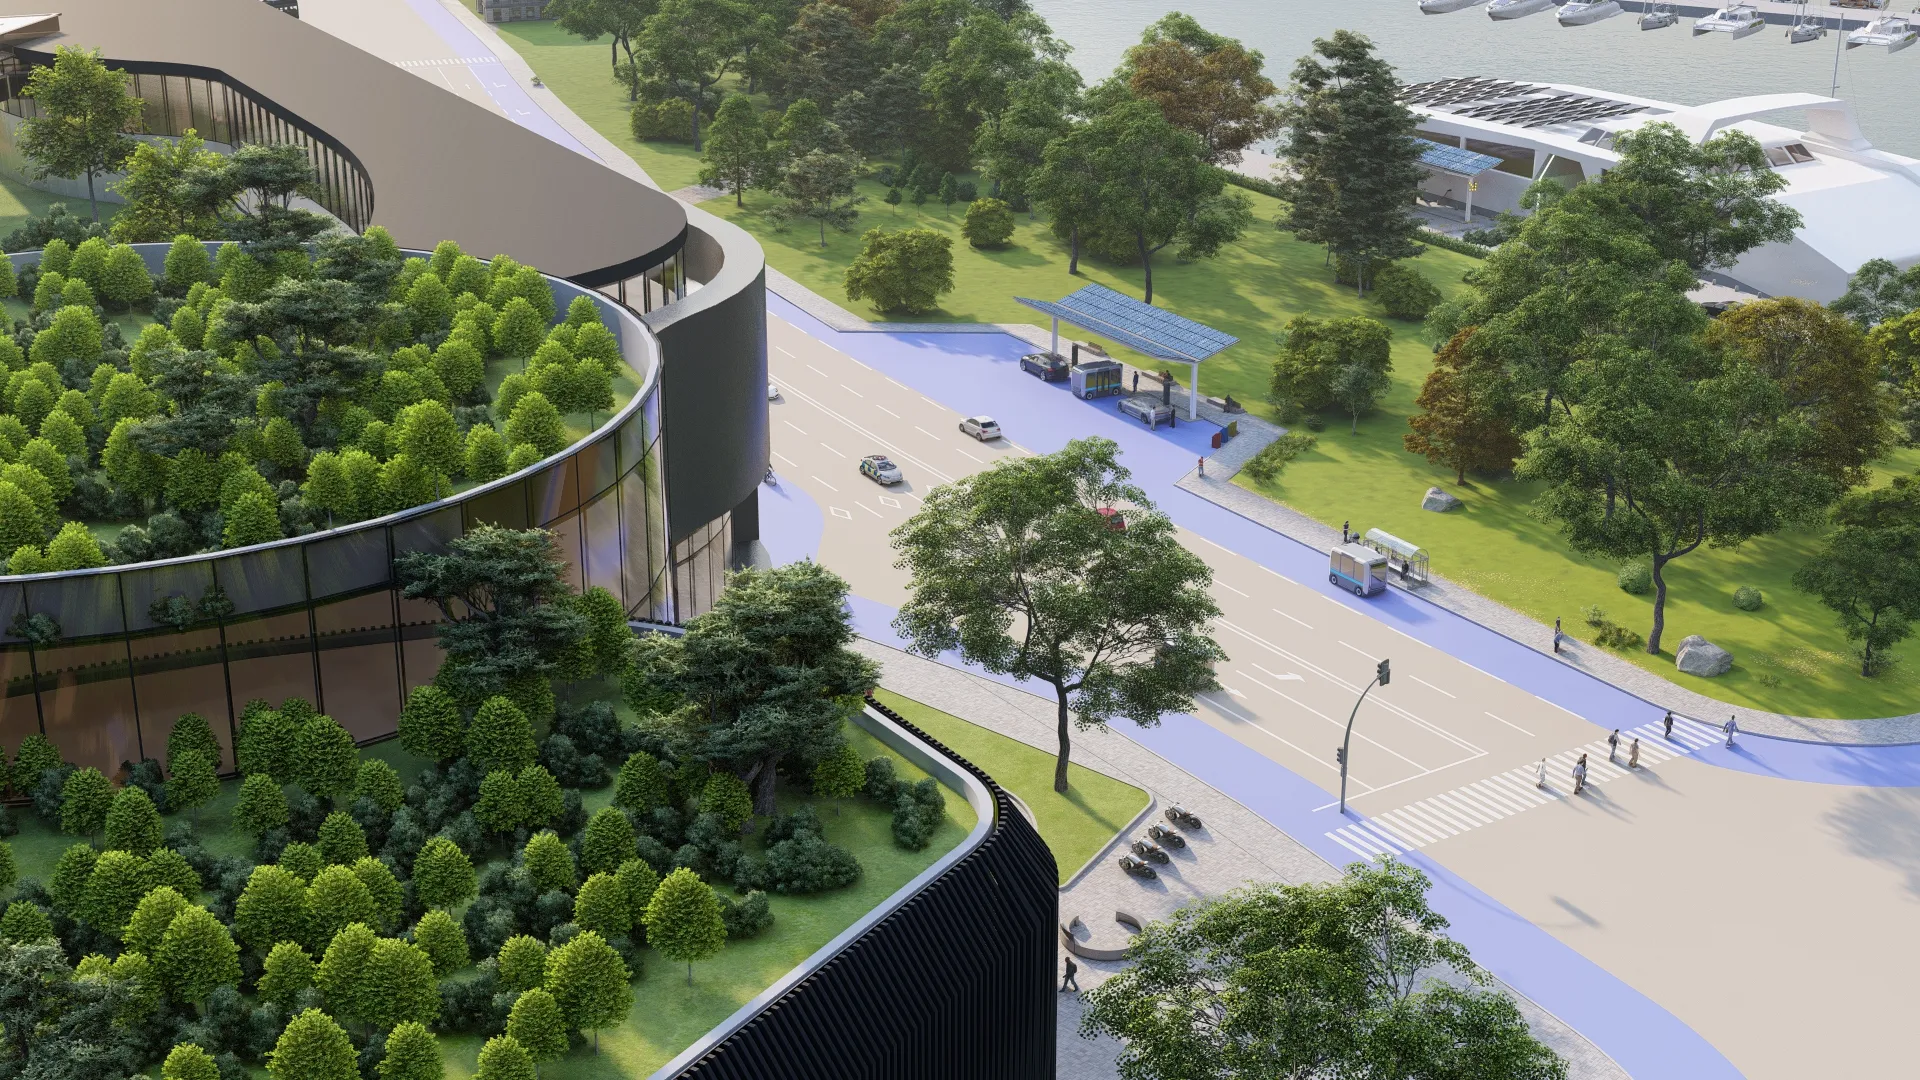 3D render overview looking down at streets with EV cars driving.